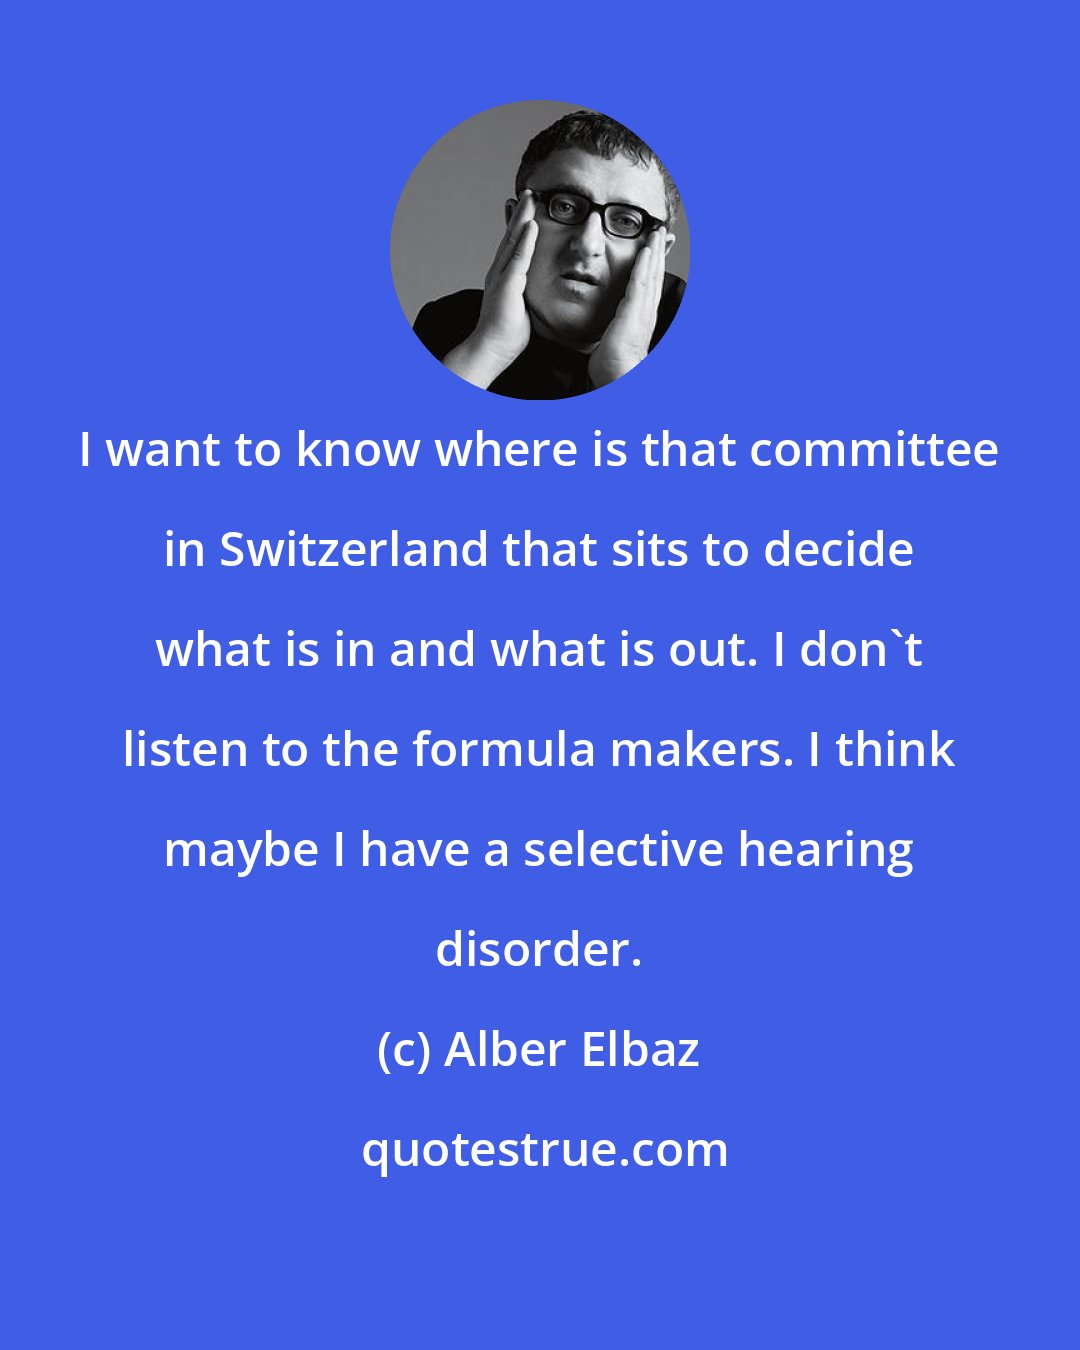 Alber Elbaz: I want to know where is that committee in Switzerland that sits to decide what is in and what is out. I don't listen to the formula makers. I think maybe I have a selective hearing disorder.